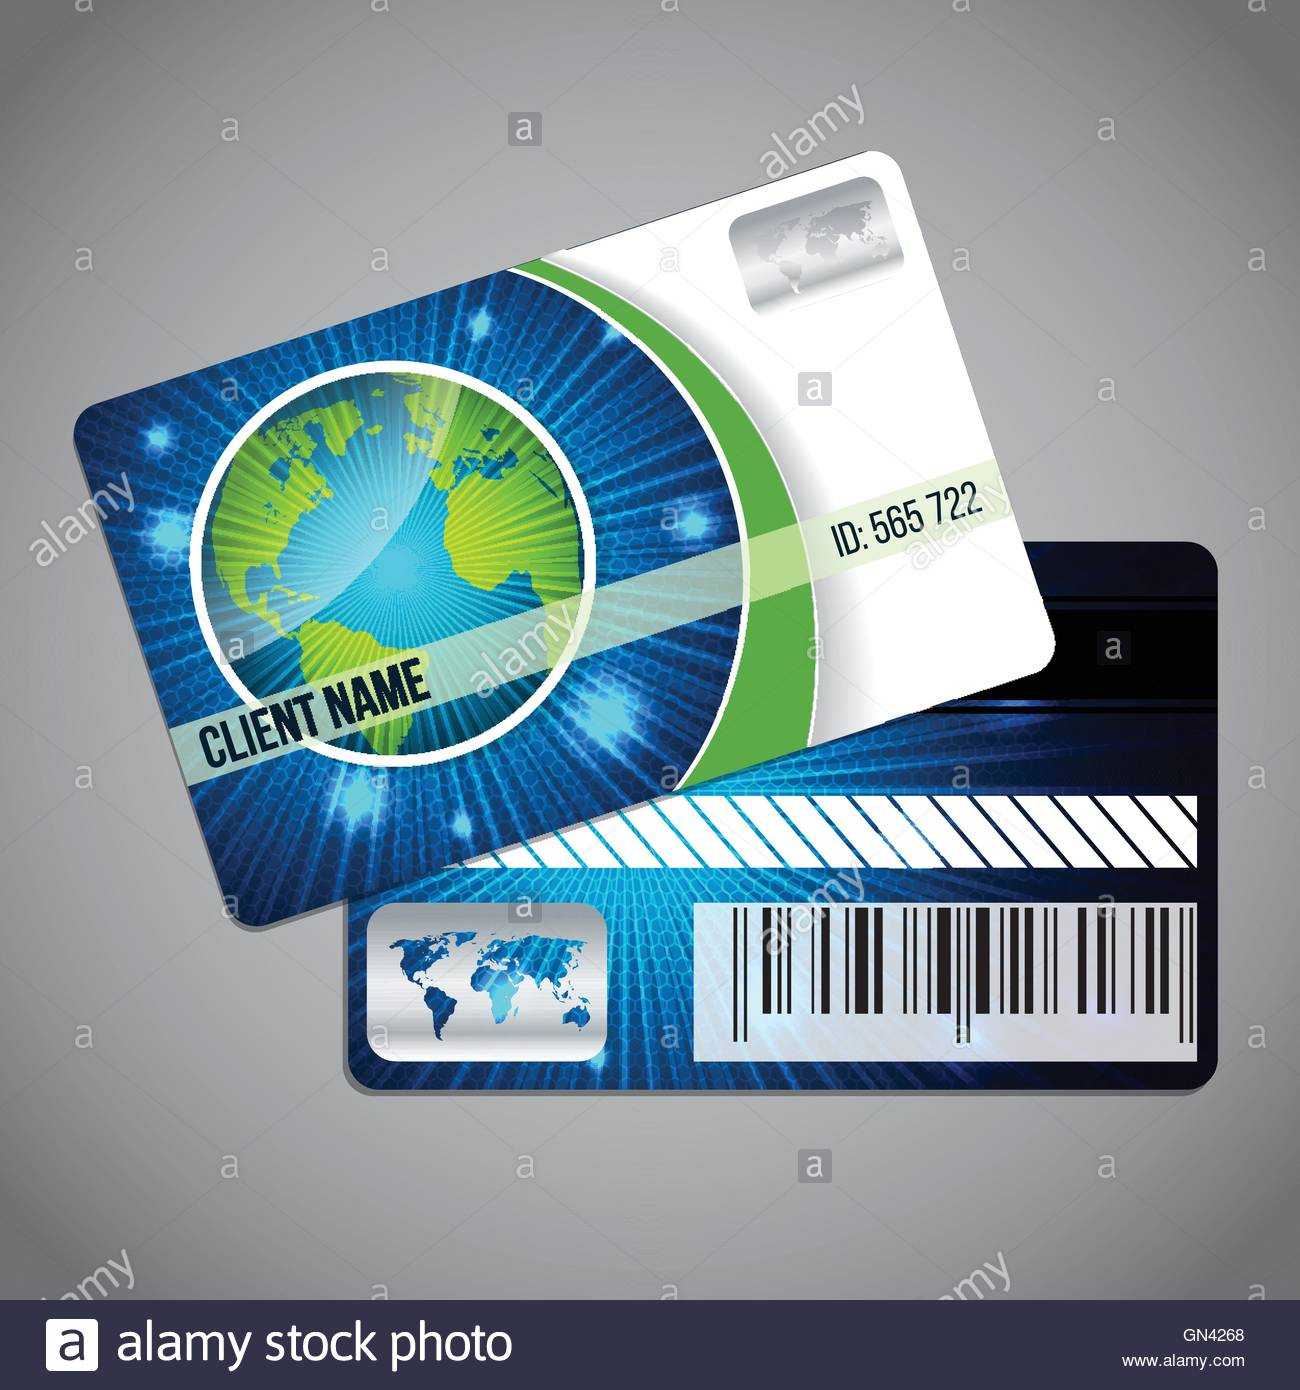 Loyalty Card With Globe Stock Vector Art & Illustration With Regard To Loyalty Card Design Template